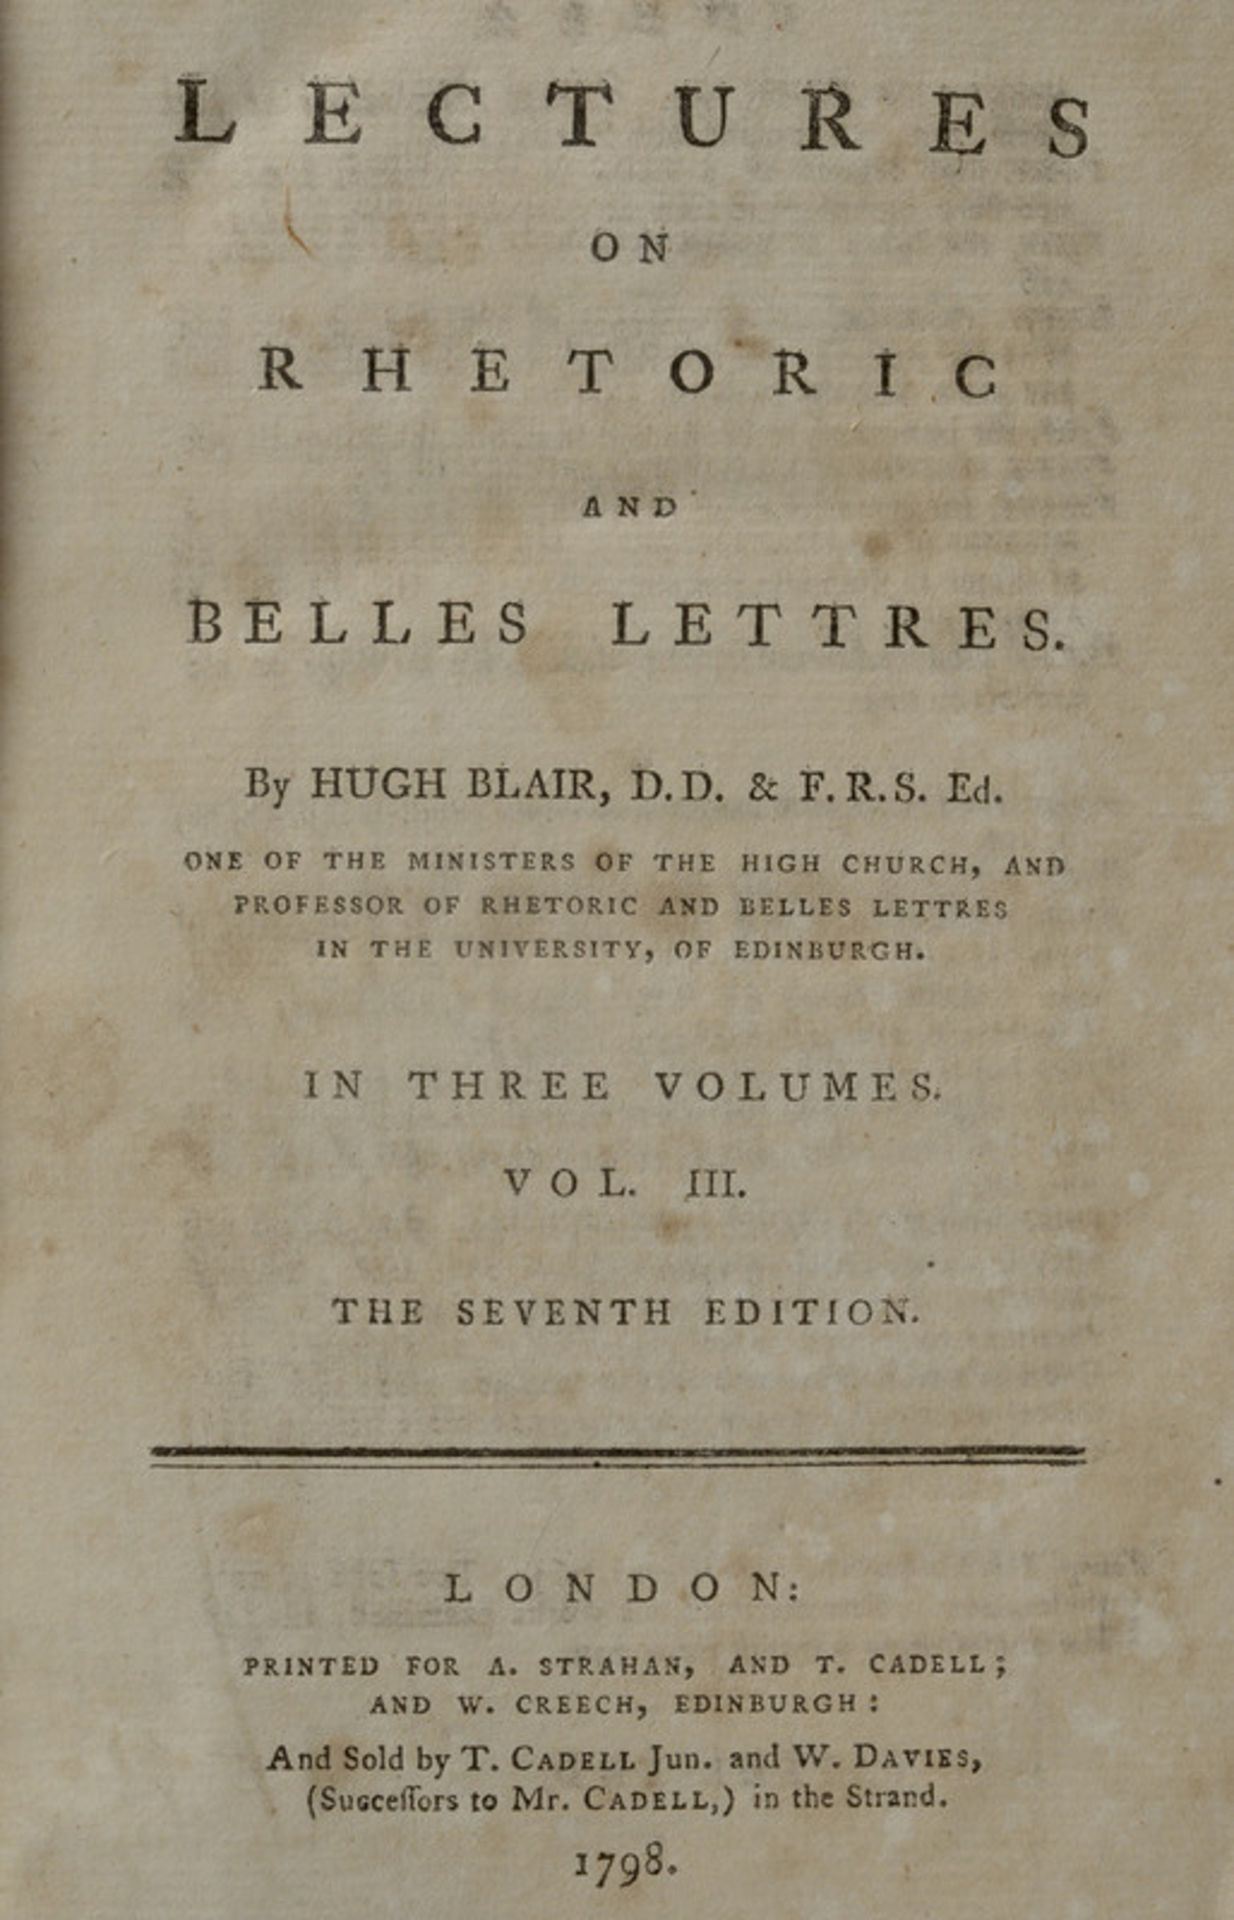 Blair, Hugh dating: late 18th Century provenance: England "Lectures on Rhetoric and Belles Lettres";